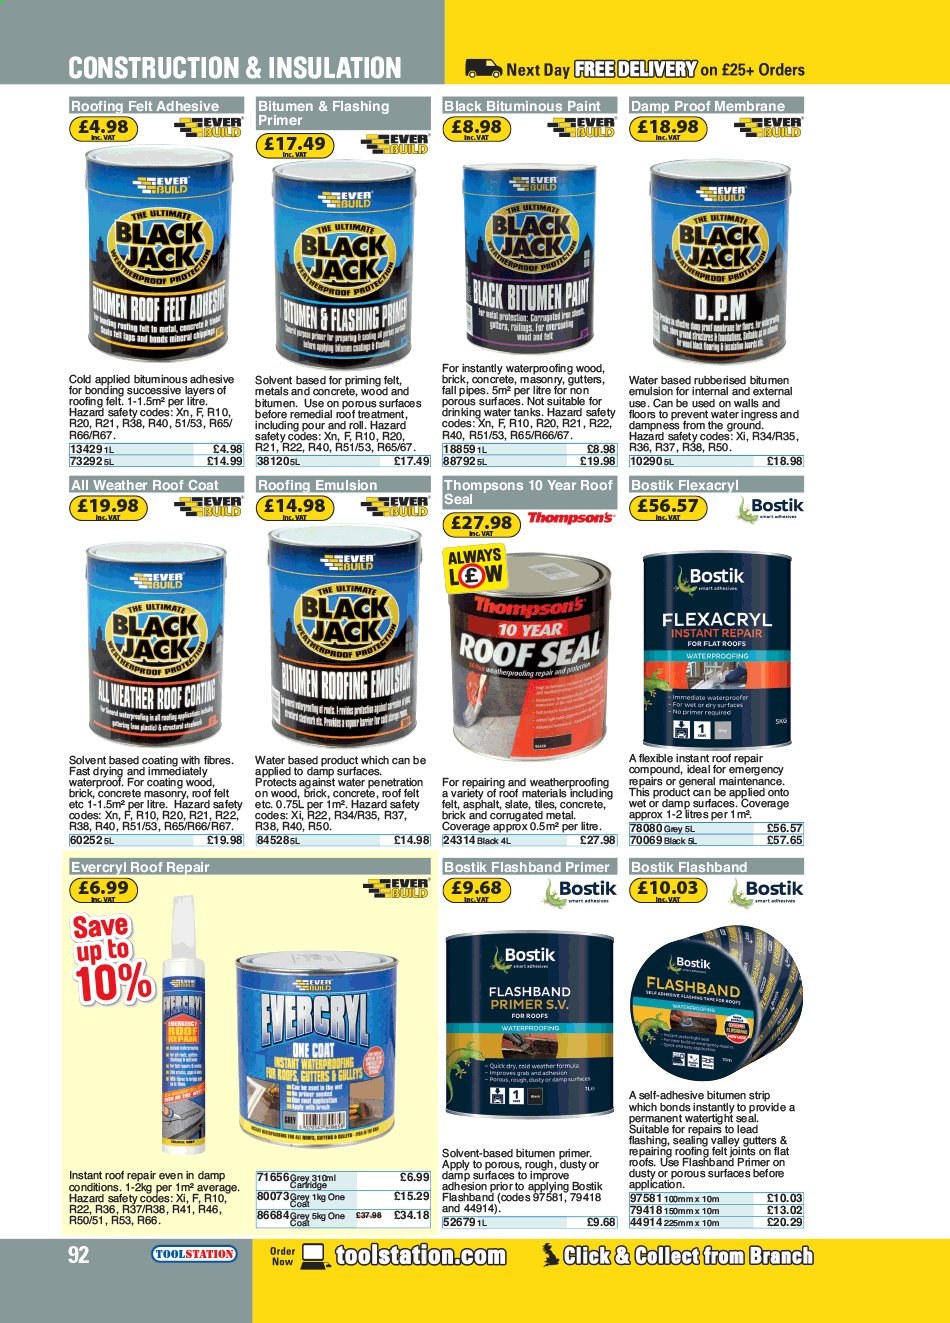 Toolstation offer . Page 92.